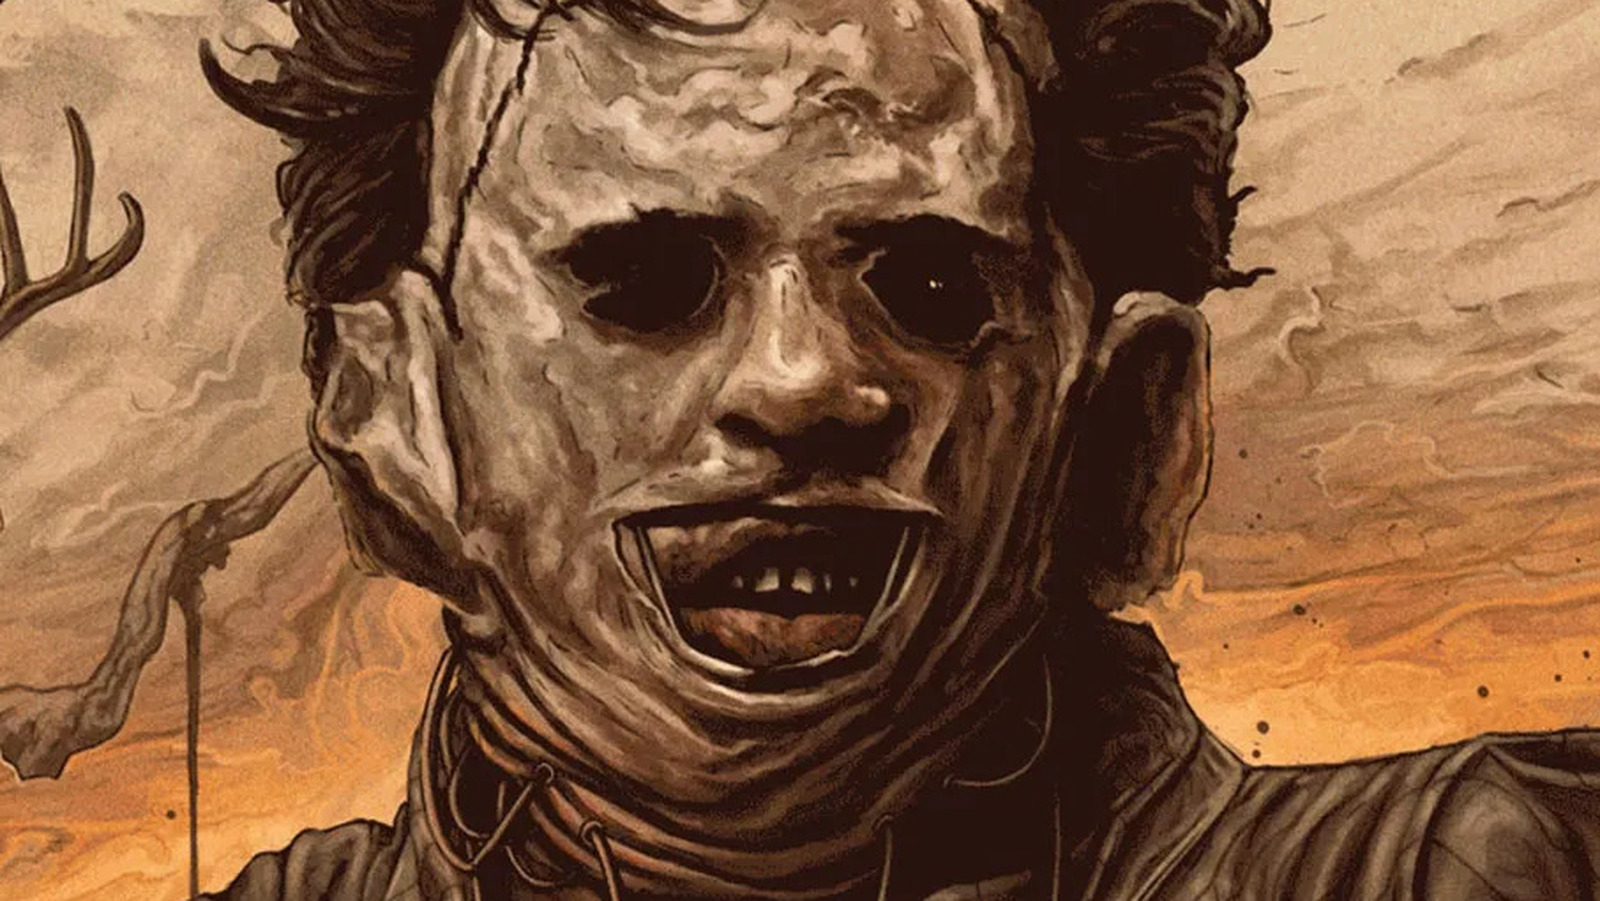 Is The Texas Chain Saw Massacre Coming To Xbox Game Pass